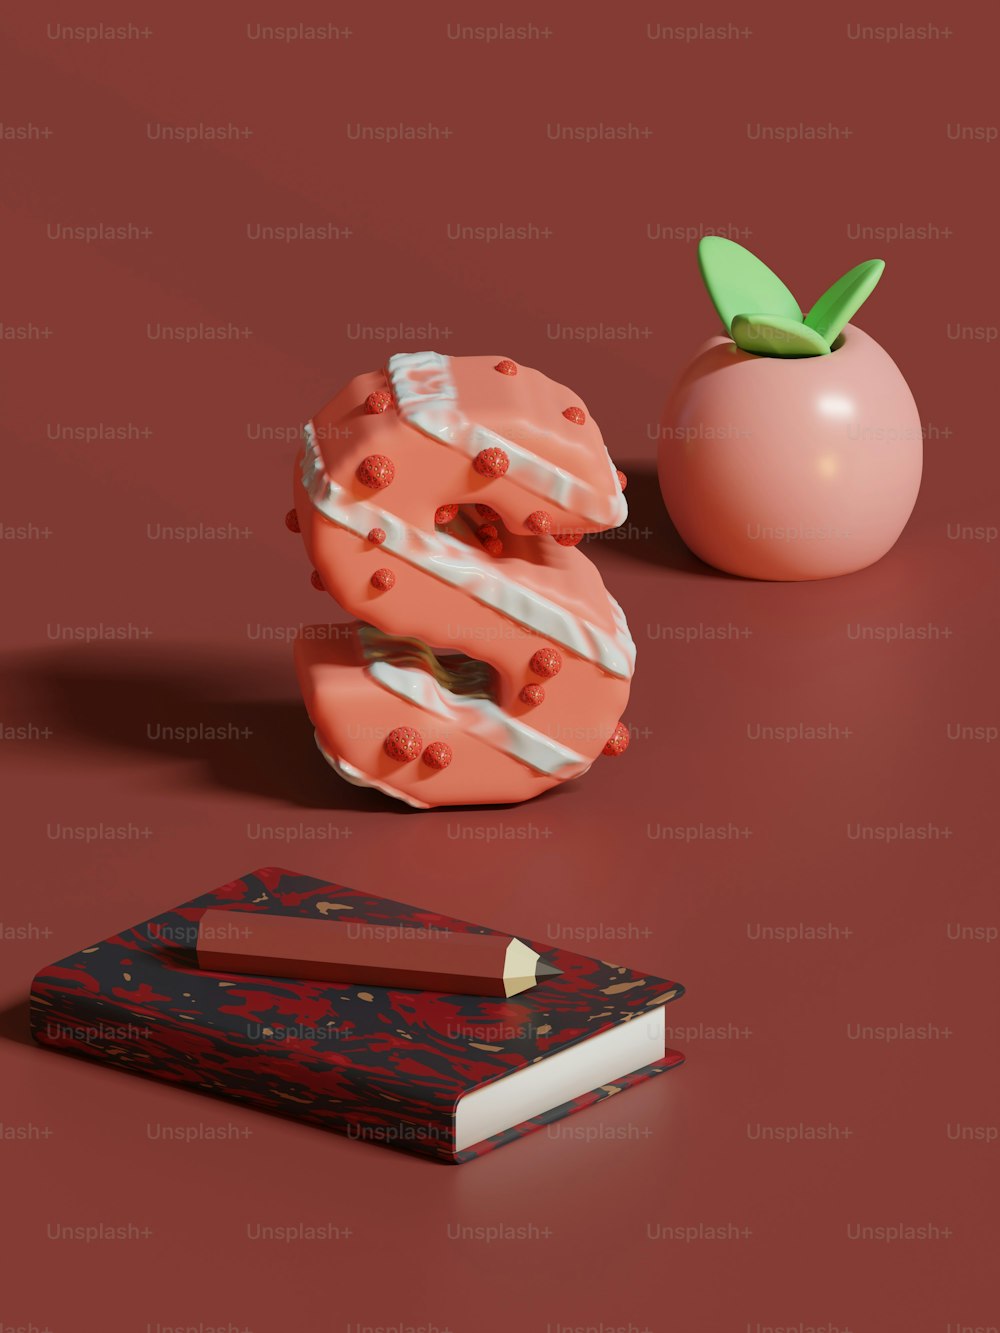 a donut with a bite taken out of it next to a book